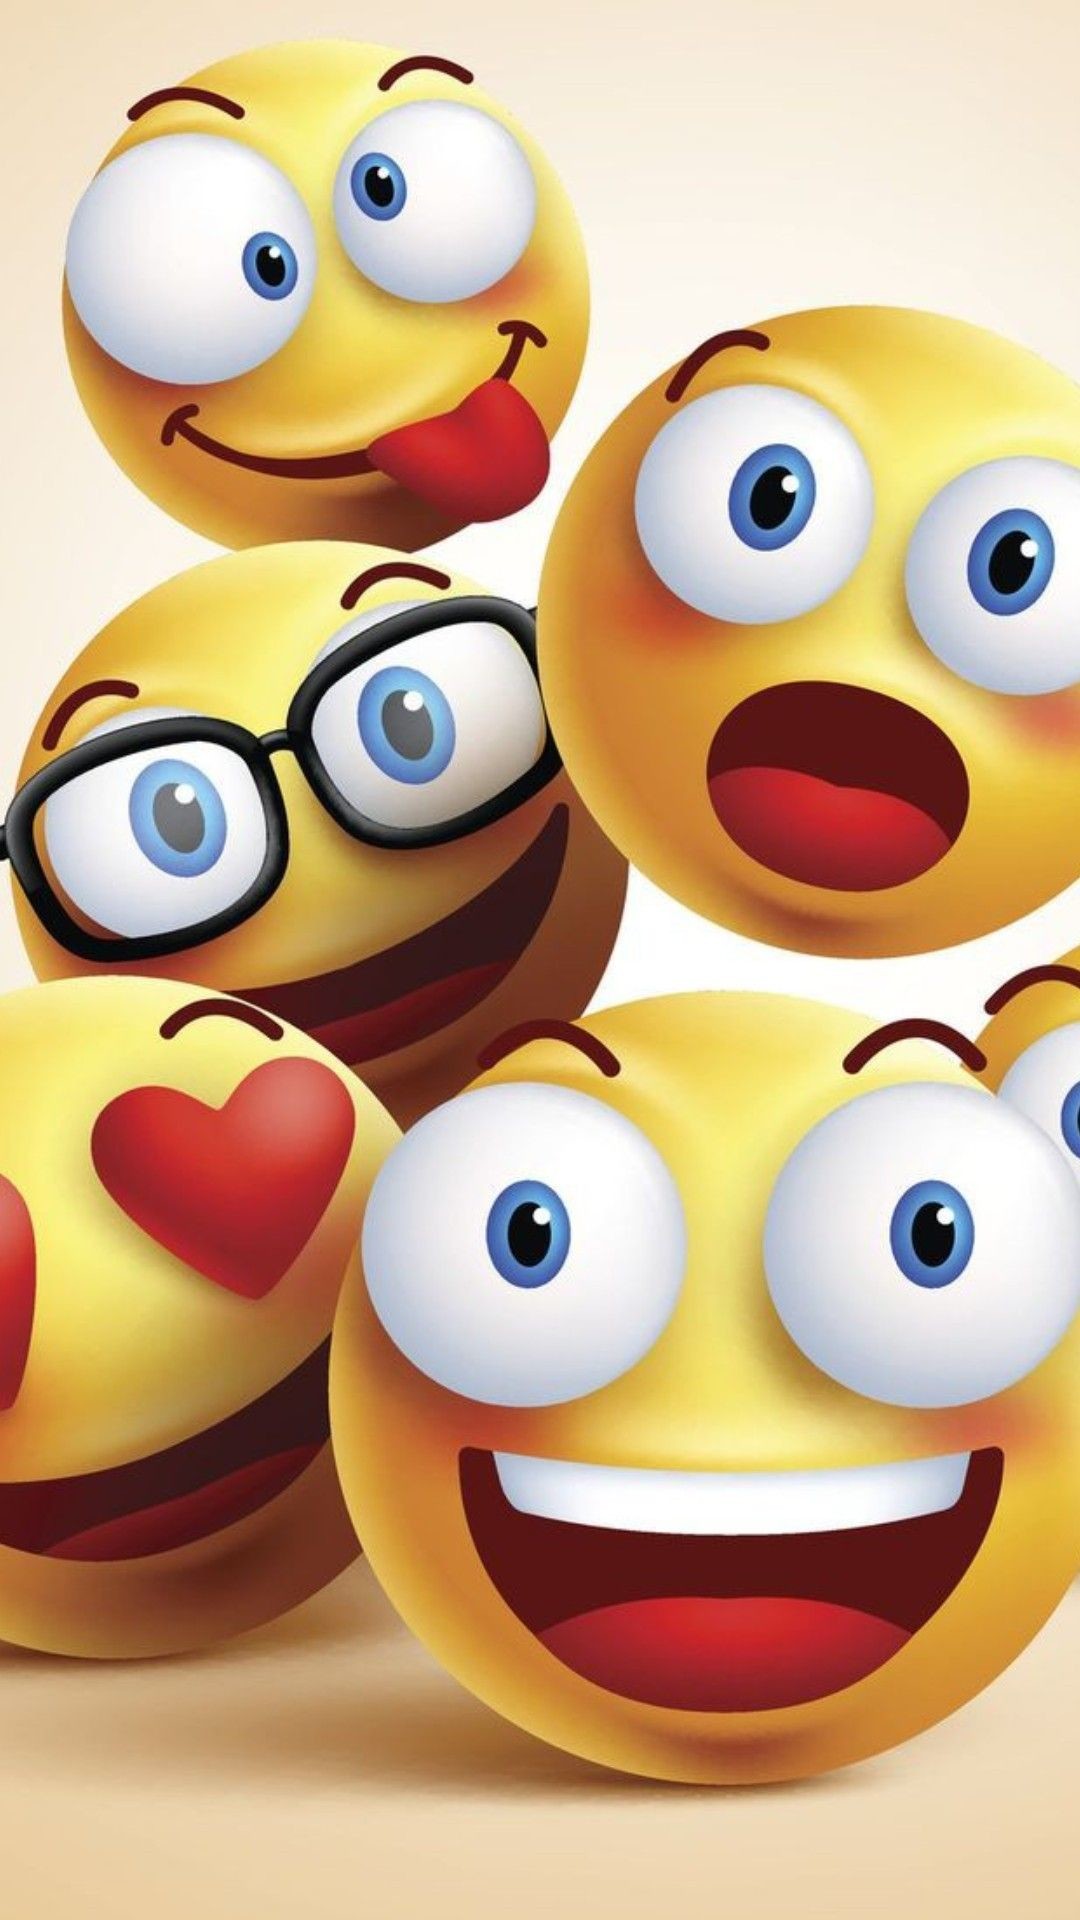 Funny Emoji Wallpapers (77+ images)